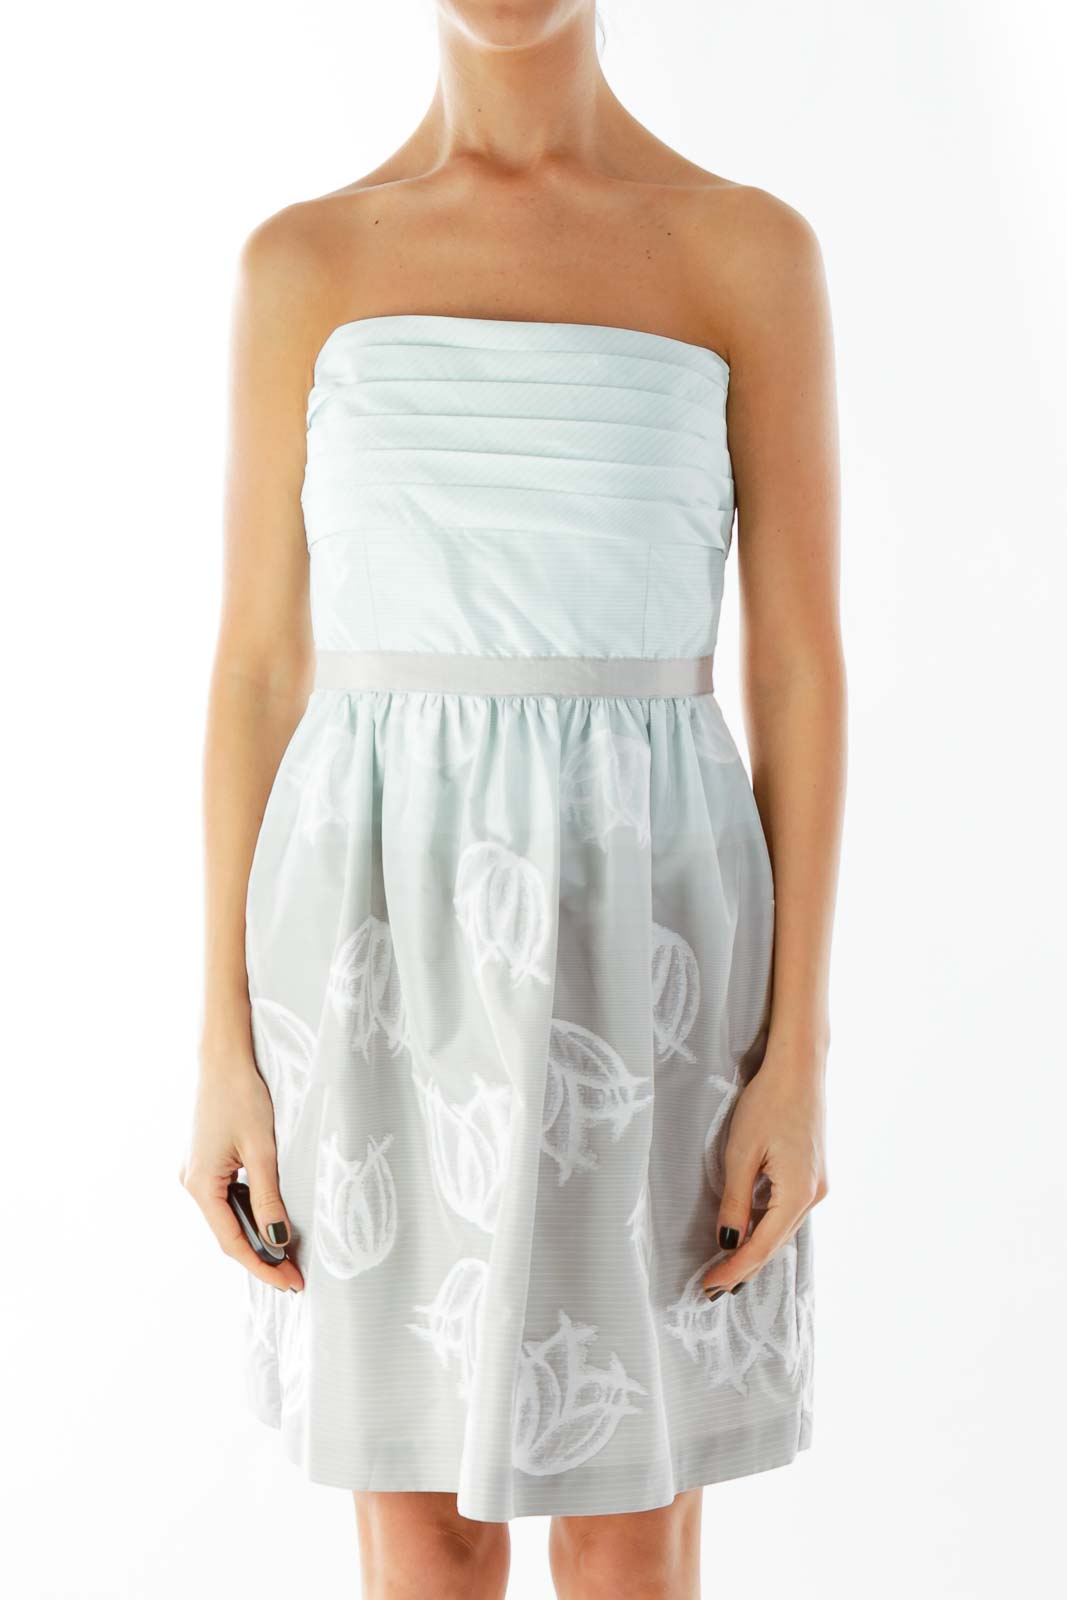 Green Gray Strapless Embroidered Striped Cocktail Dress Front